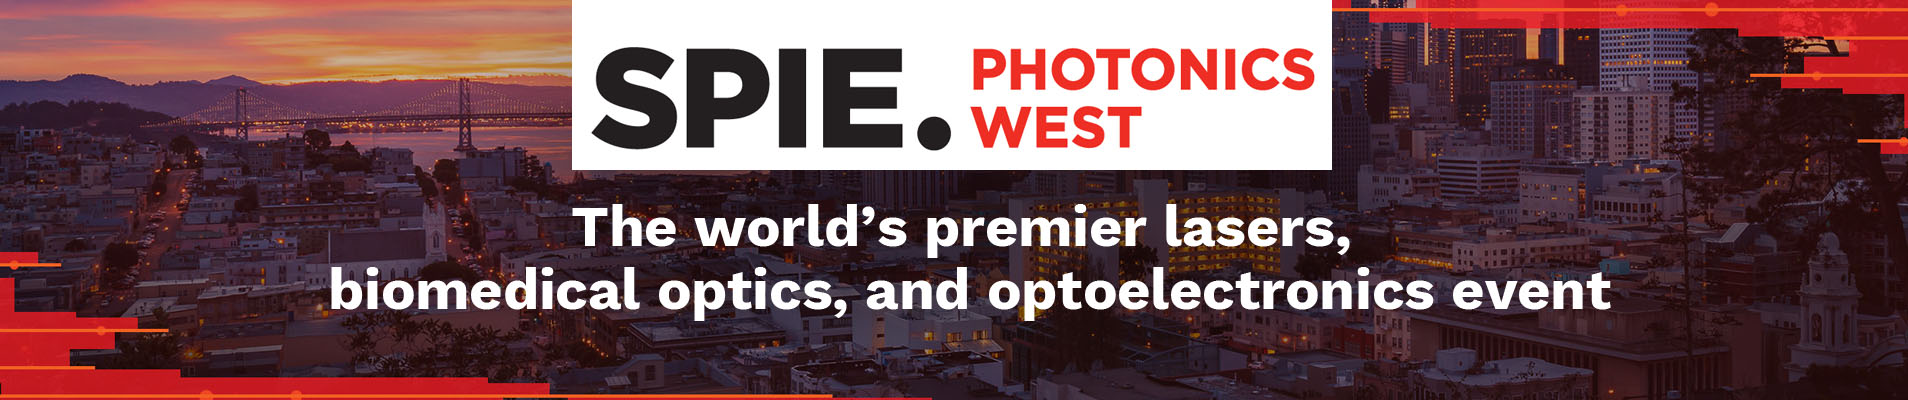 spie_photonic_west2022_banner_ENG